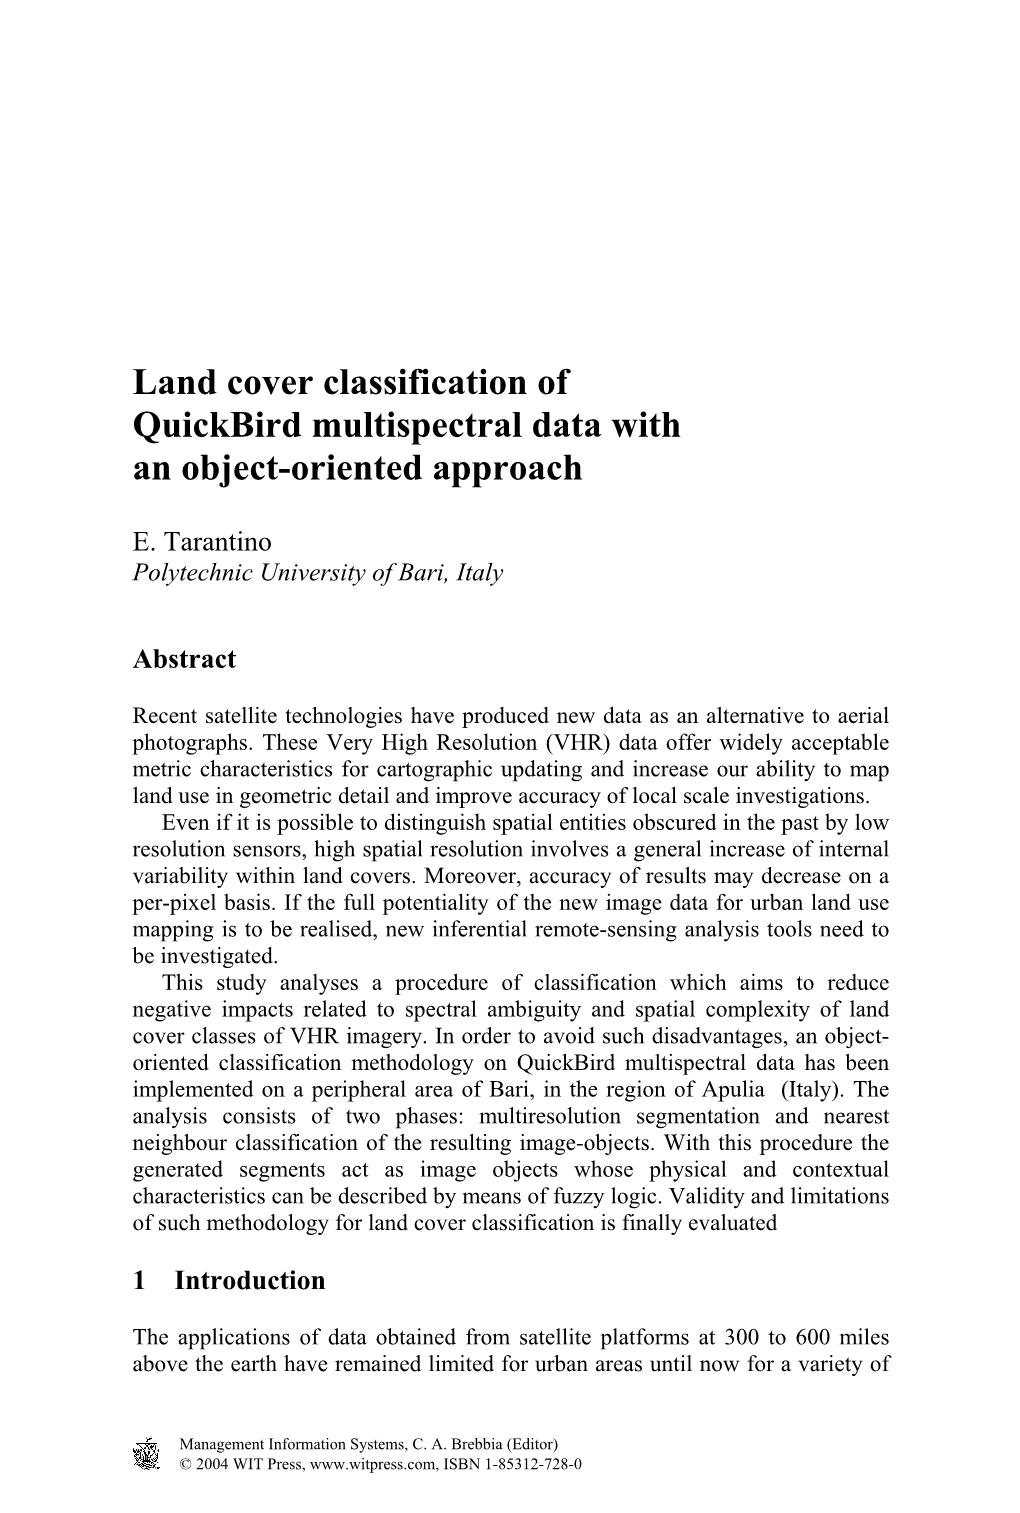 Land Cover Classification of Quickbird Multispectral Data with an Object-Oriented Approach